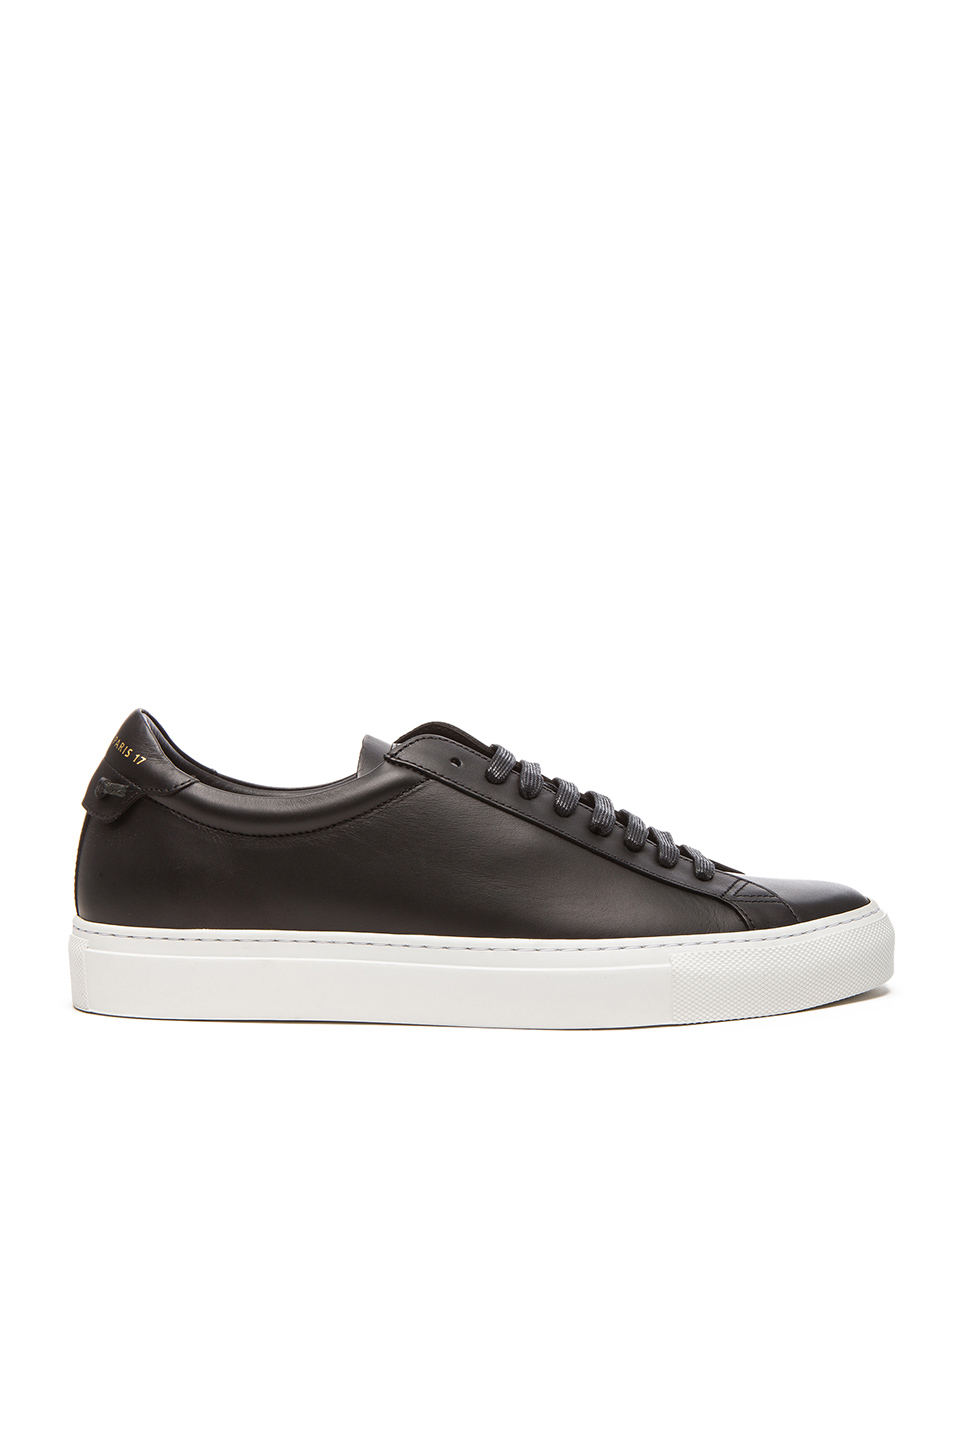 Givenchy Knots Low Top Leather Sneakers in Black for Men | Lyst